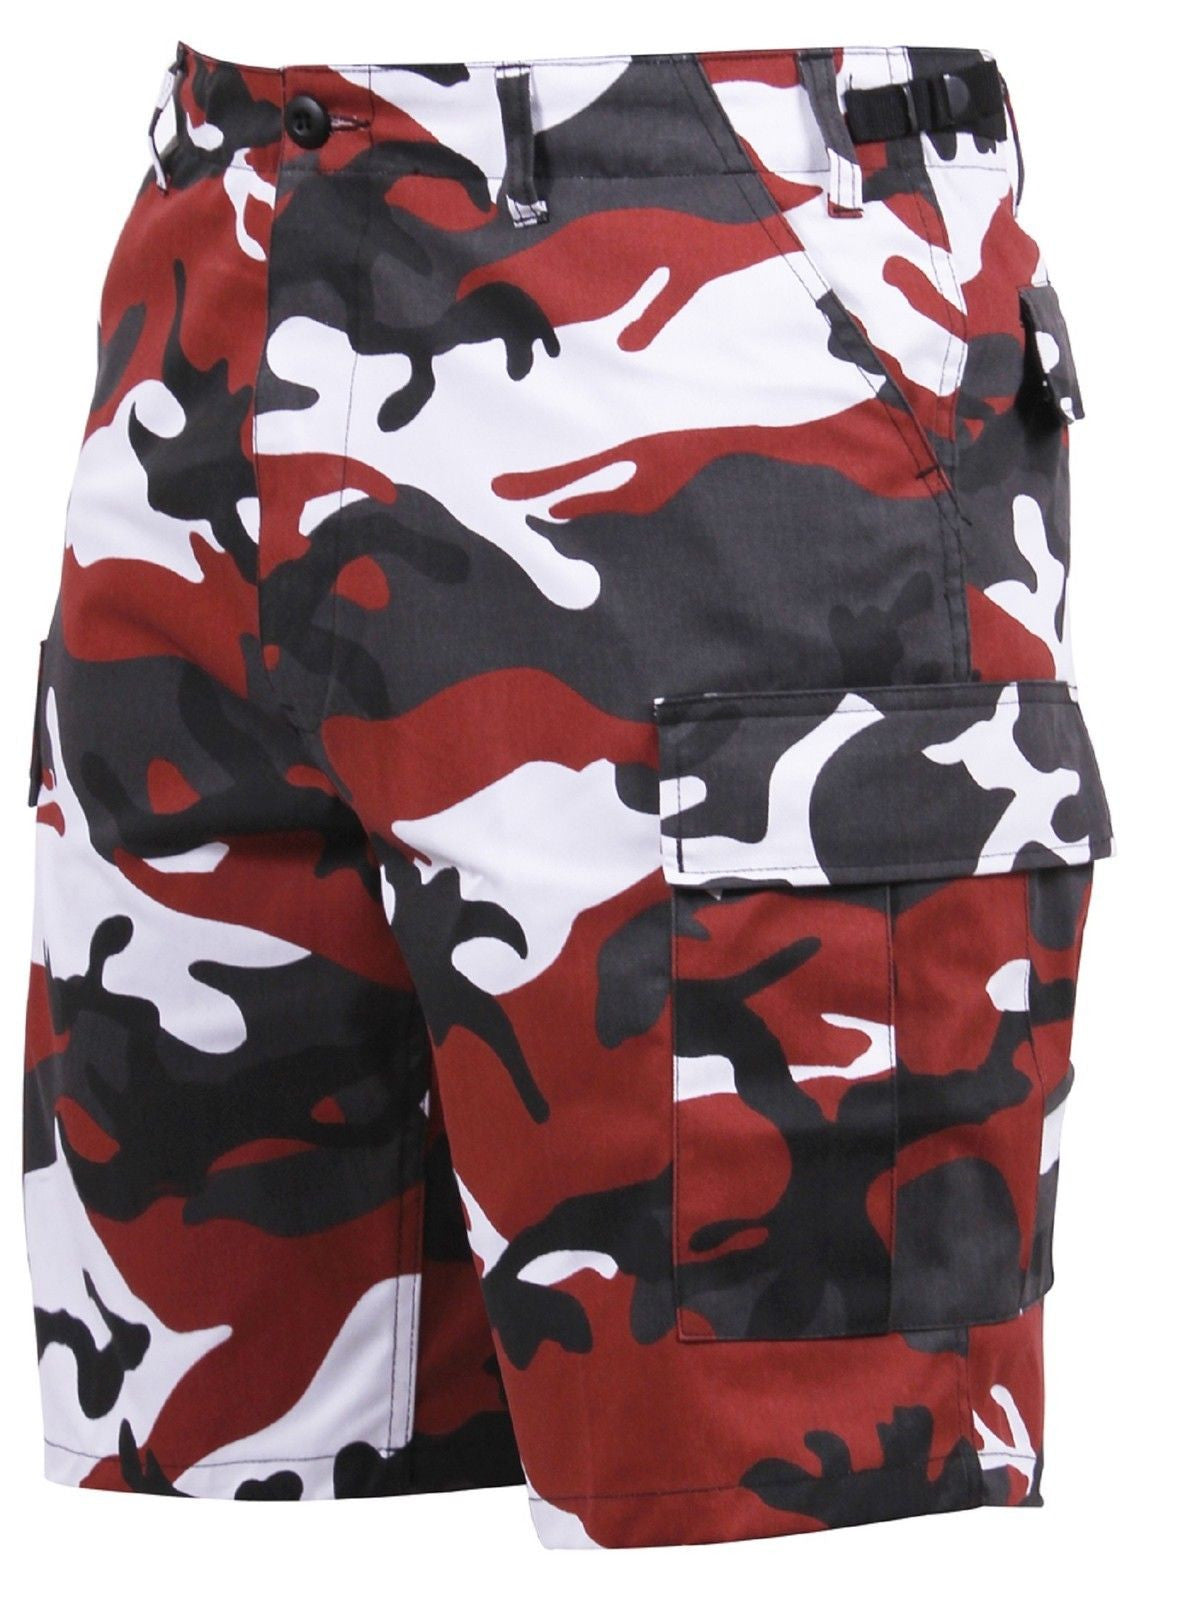 Red Camouflage BDU Cargo Shorts - Black 